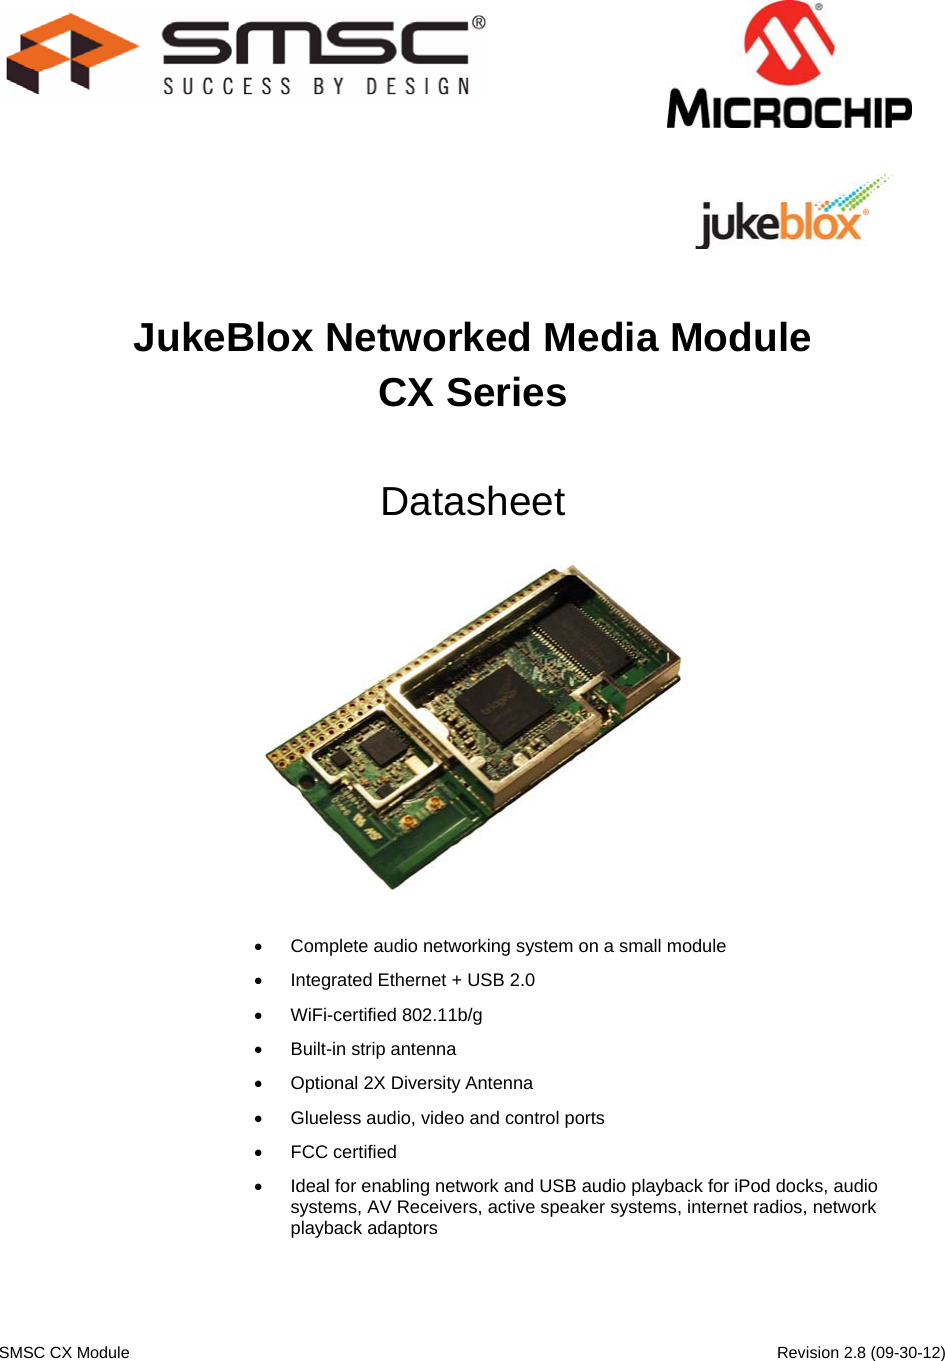    SMSC CX Module      Revision 2.8 (09-30-12)                                    JukeBlox Networked Media Module CX Series  Datasheet     Complete audio networking system on a small module  Integrated Ethernet + USB 2.0  WiFi-certified 802.11b/g  Built-in strip antenna  Optional 2X Diversity Antenna  Glueless audio, video and control ports  FCC certified  Ideal for enabling network and USB audio playback for iPod docks, audio systems, AV Receivers, active speaker systems, internet radios, network playback adaptors  